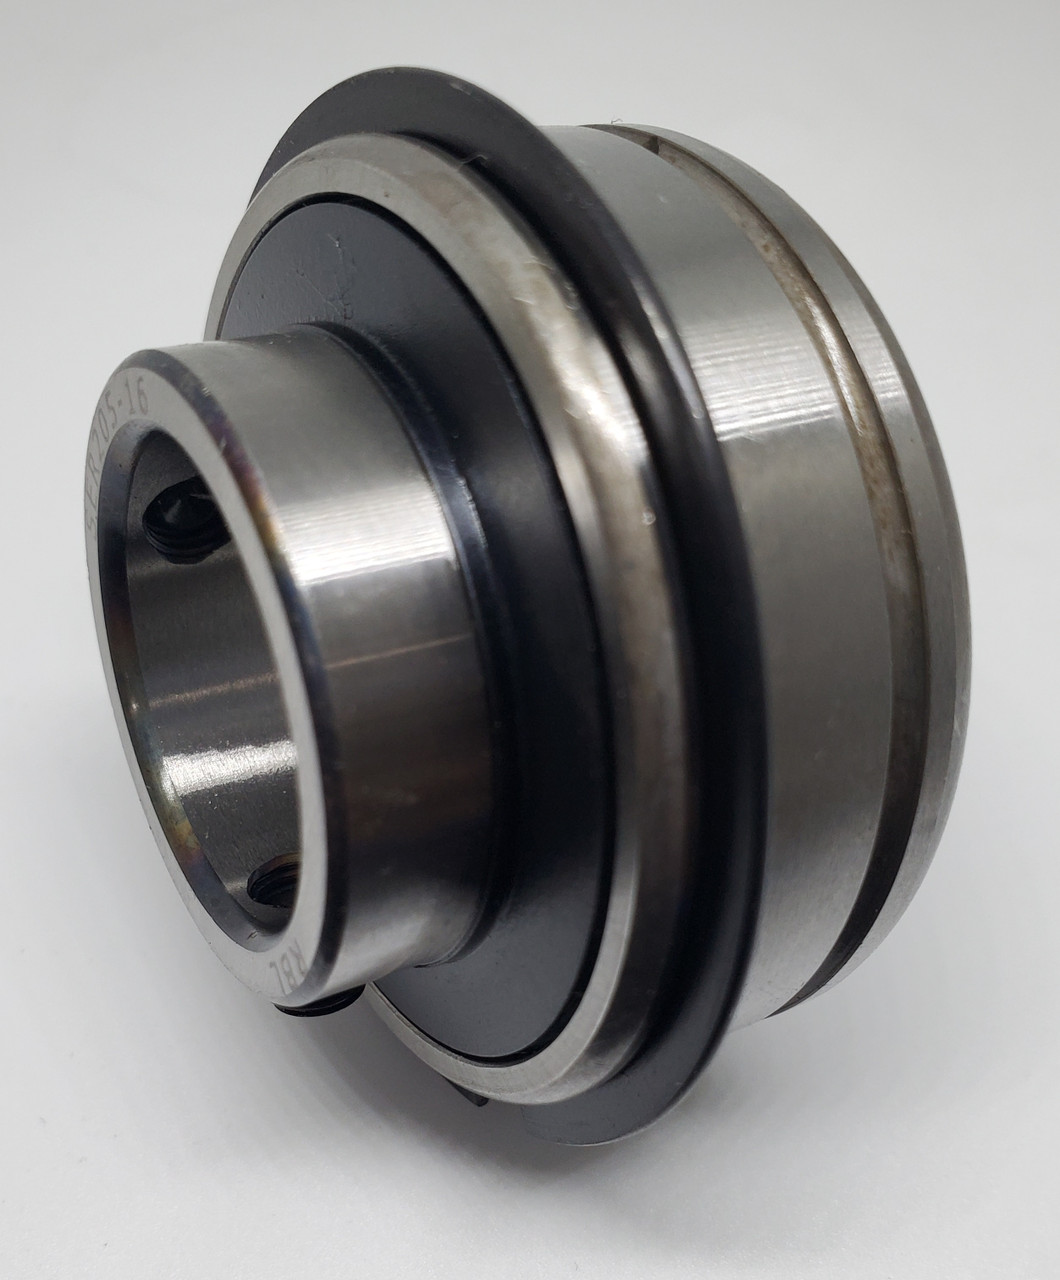 7614DLG GENERIC 0.875x2x0.625/1.179 Normal duty bearing insert with a parallel outer race, snap ring and groove with grubscrew locking - Imperial Thumbnail